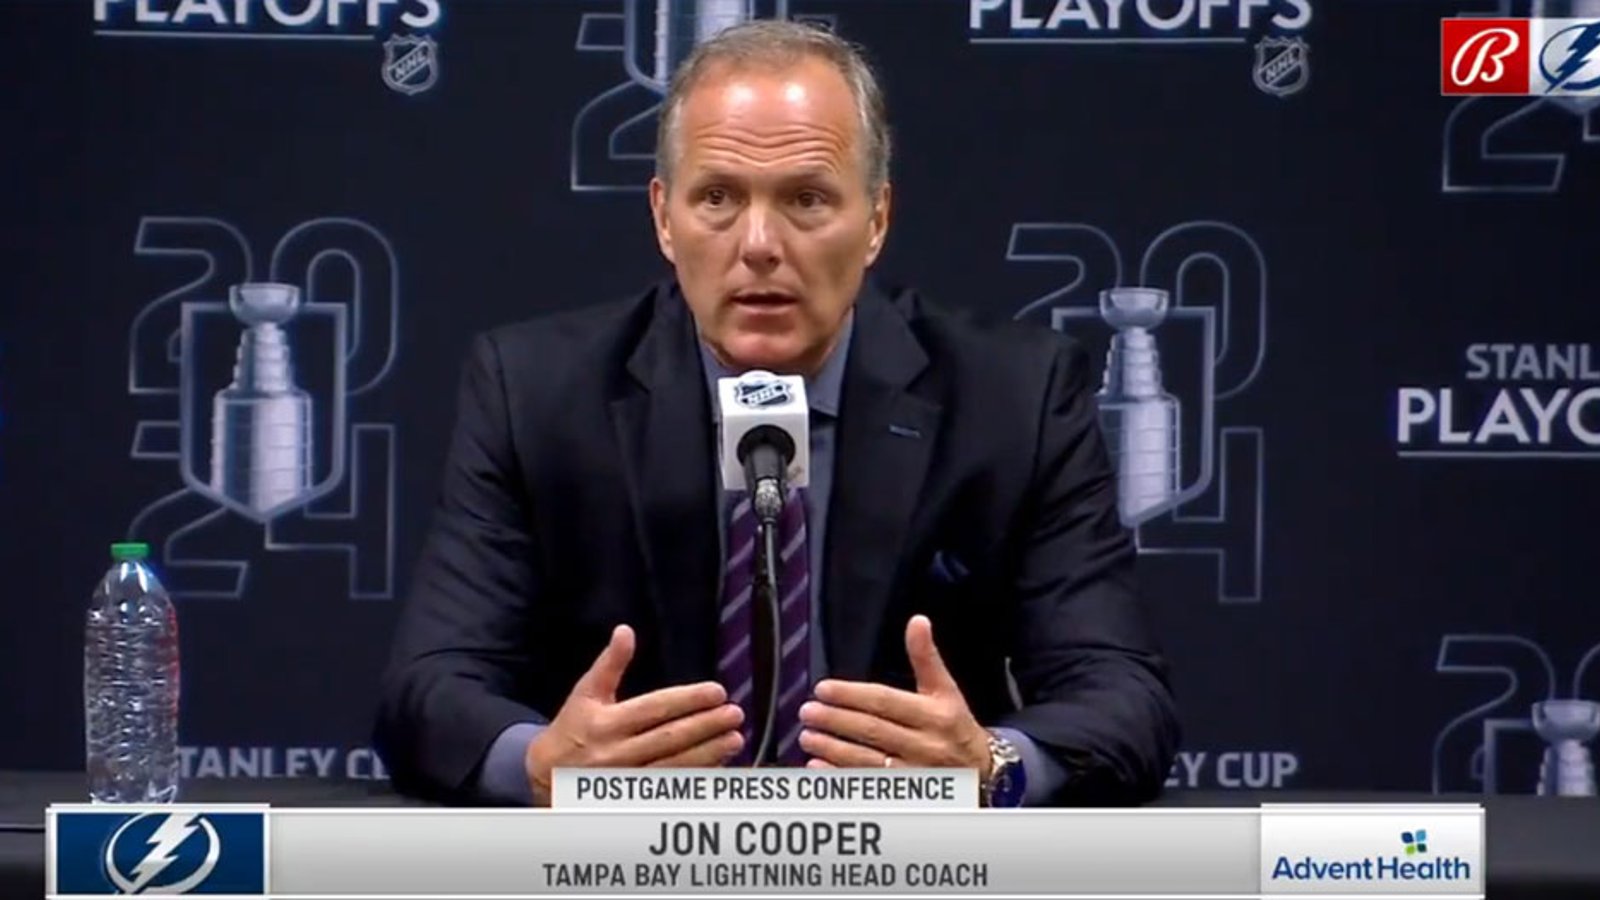 Jon Cooper under fire for using 'sexist' language in press conference last night